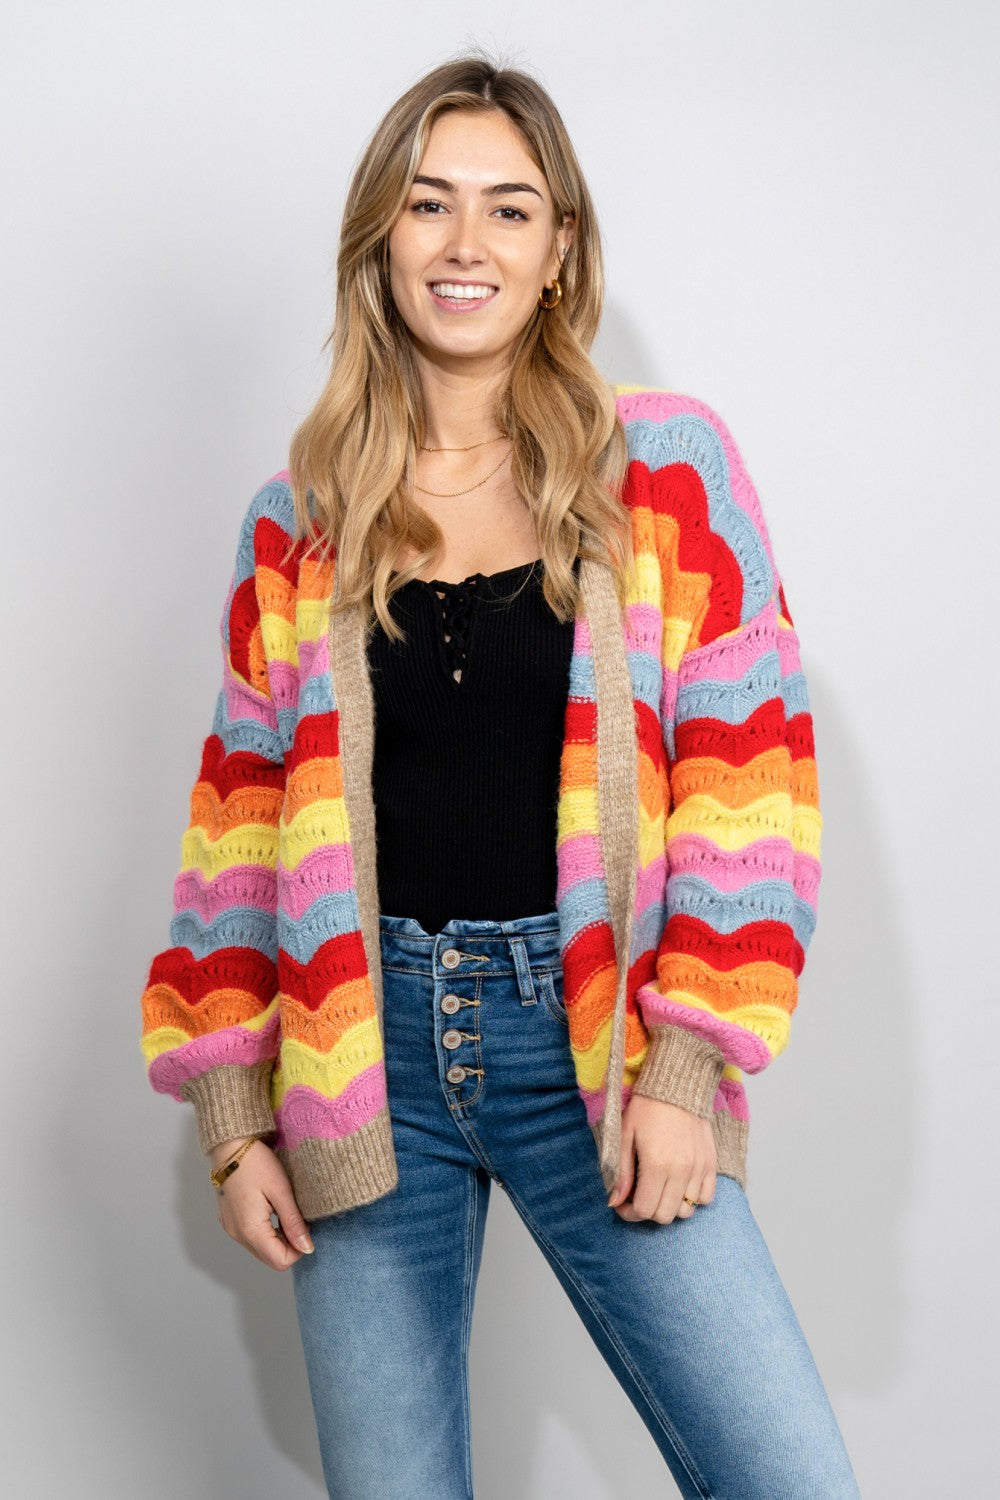 Trendsi Cupid Beauty Supplies Rainbow / S/M Woman Cardigan ee:some Rainbow Stripe Dropped Shoulder Open Front Cardigan